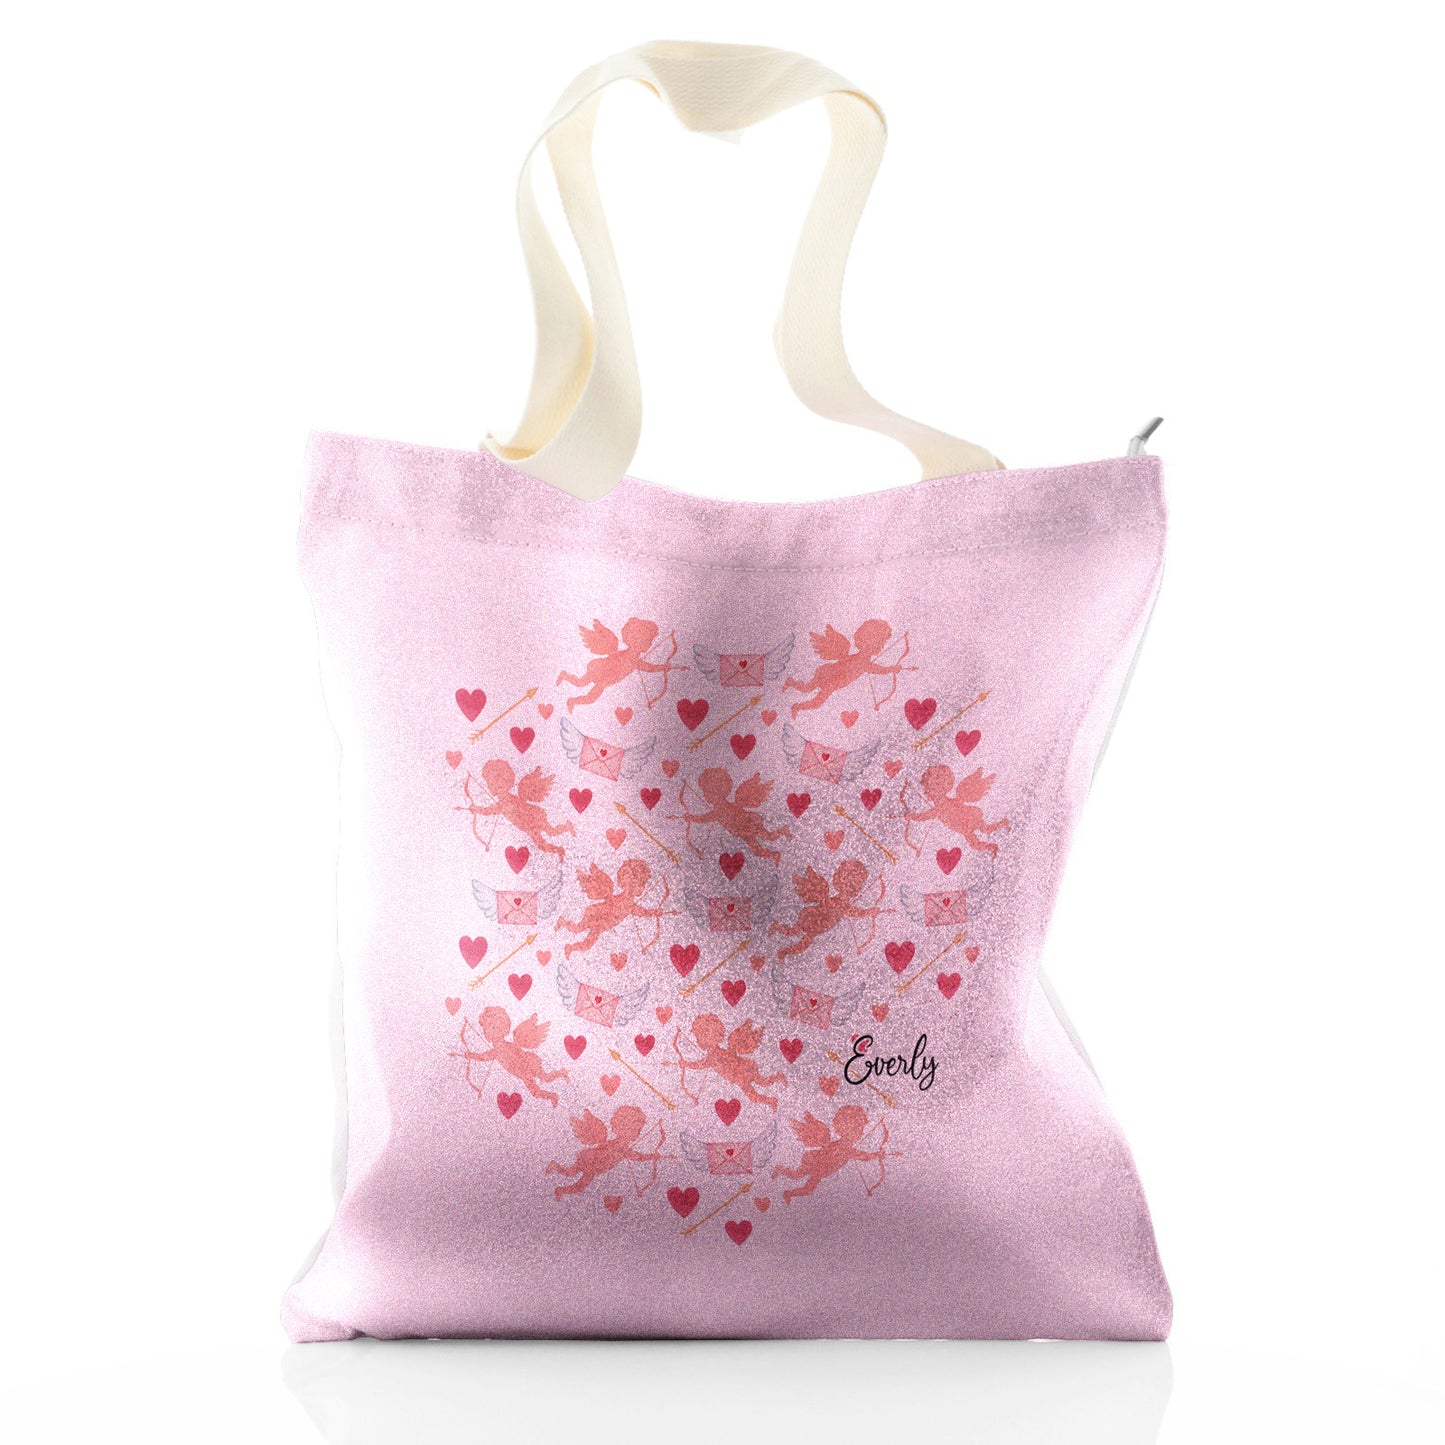 Personalised Glitter Tote Bag with Stylish Text and Cupid Hearts Print